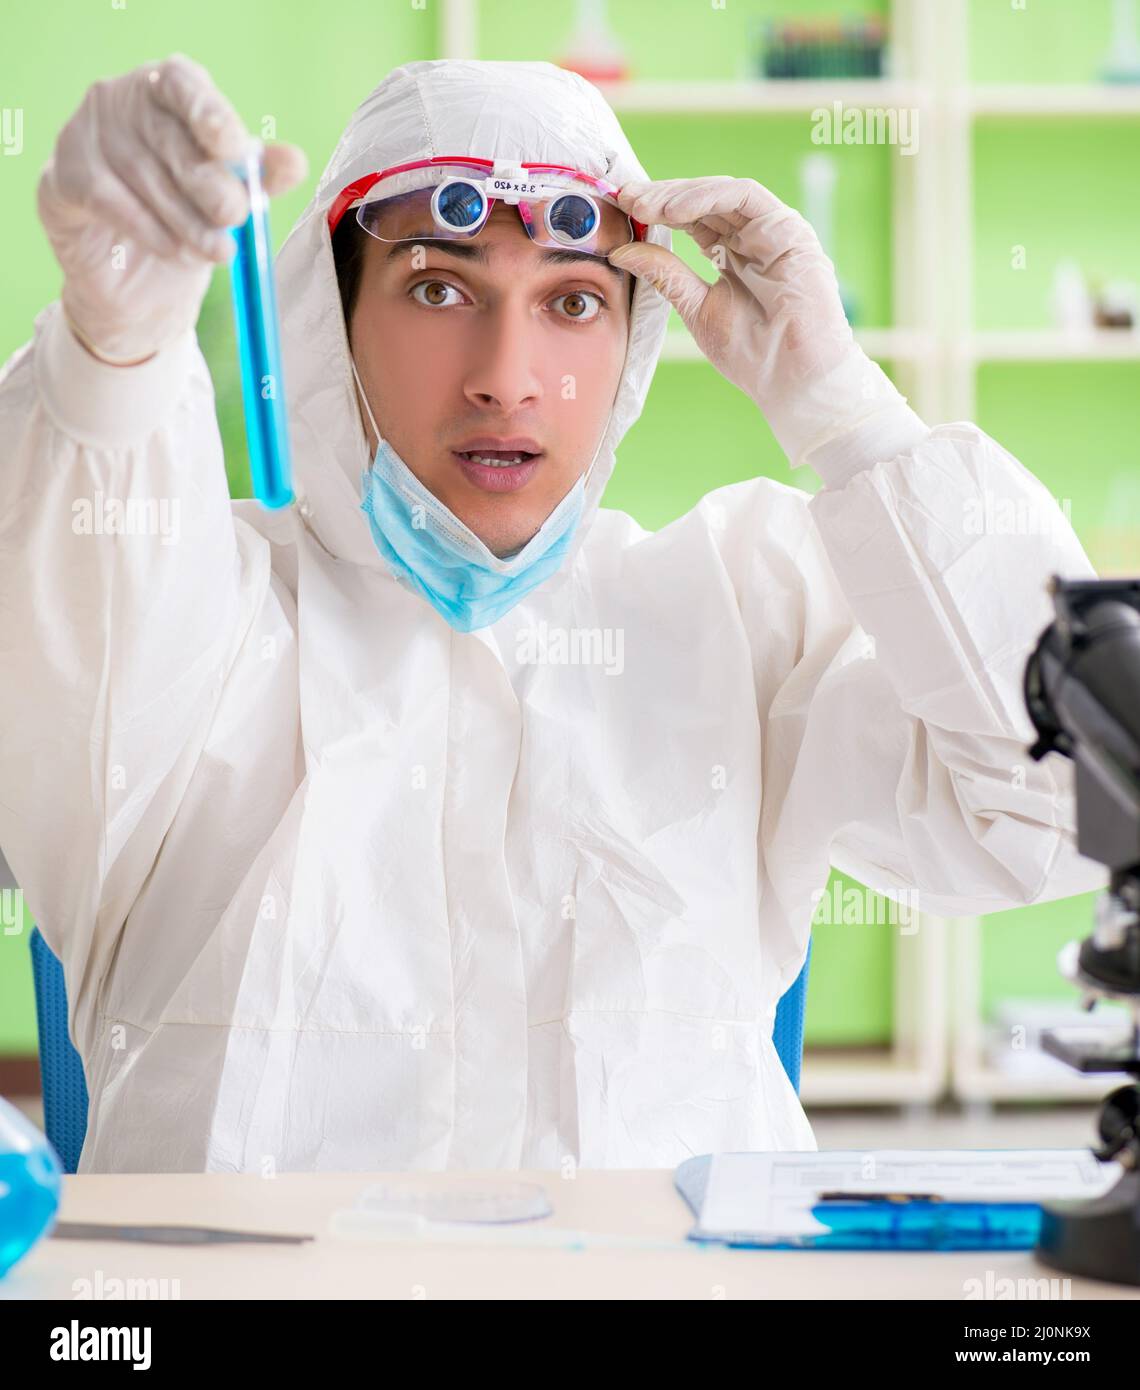 Chemist working in the lab on new experiment Stock Photo